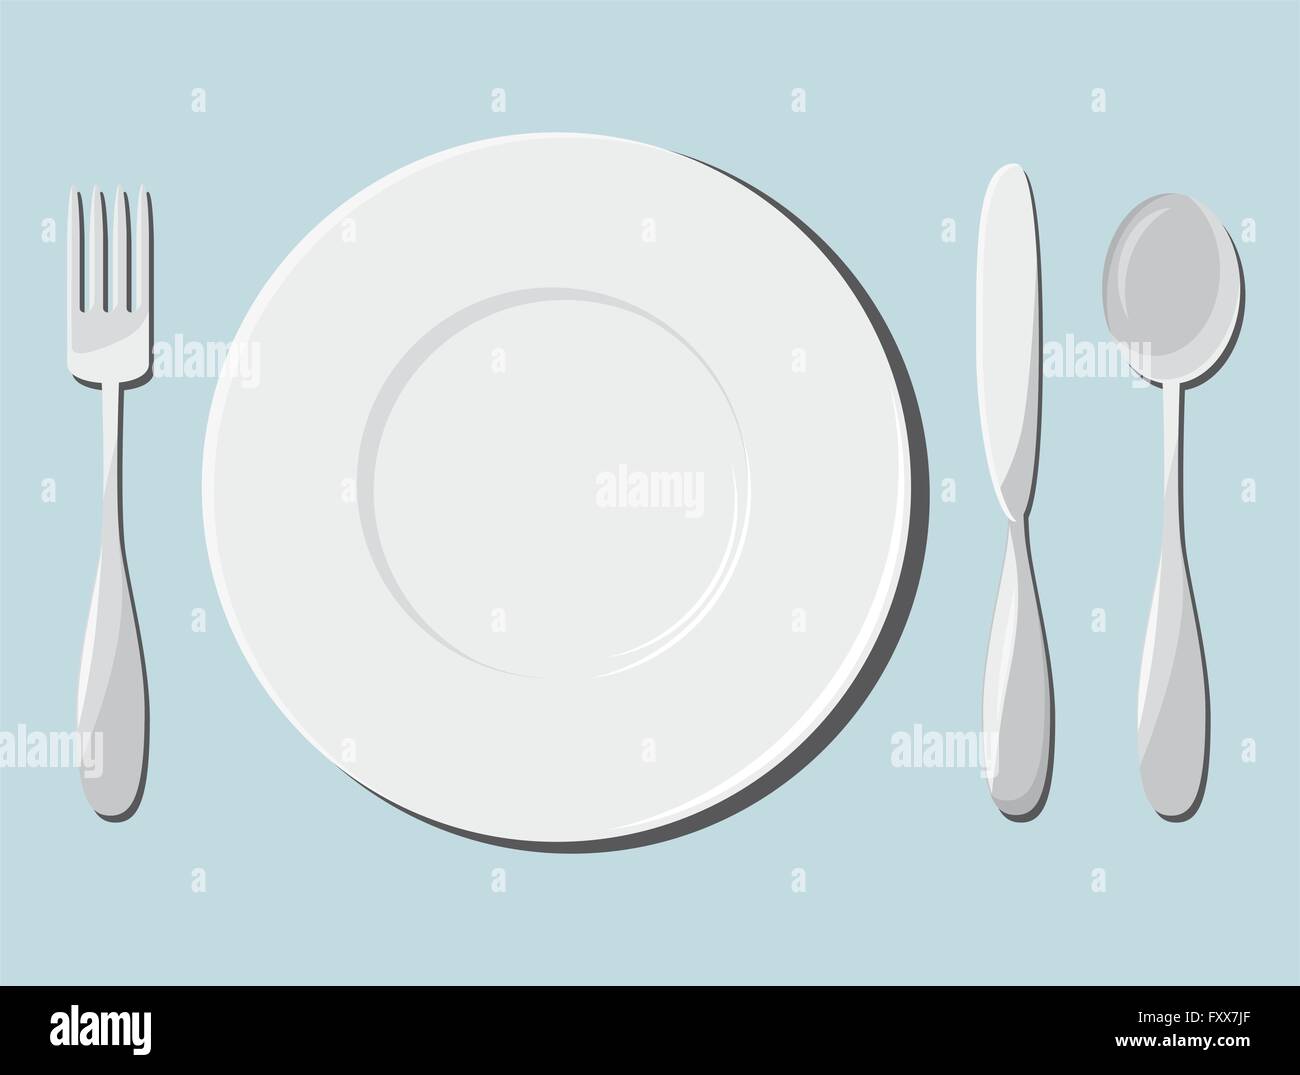 Dishes and cutlery. Vector illustration Stock Vector